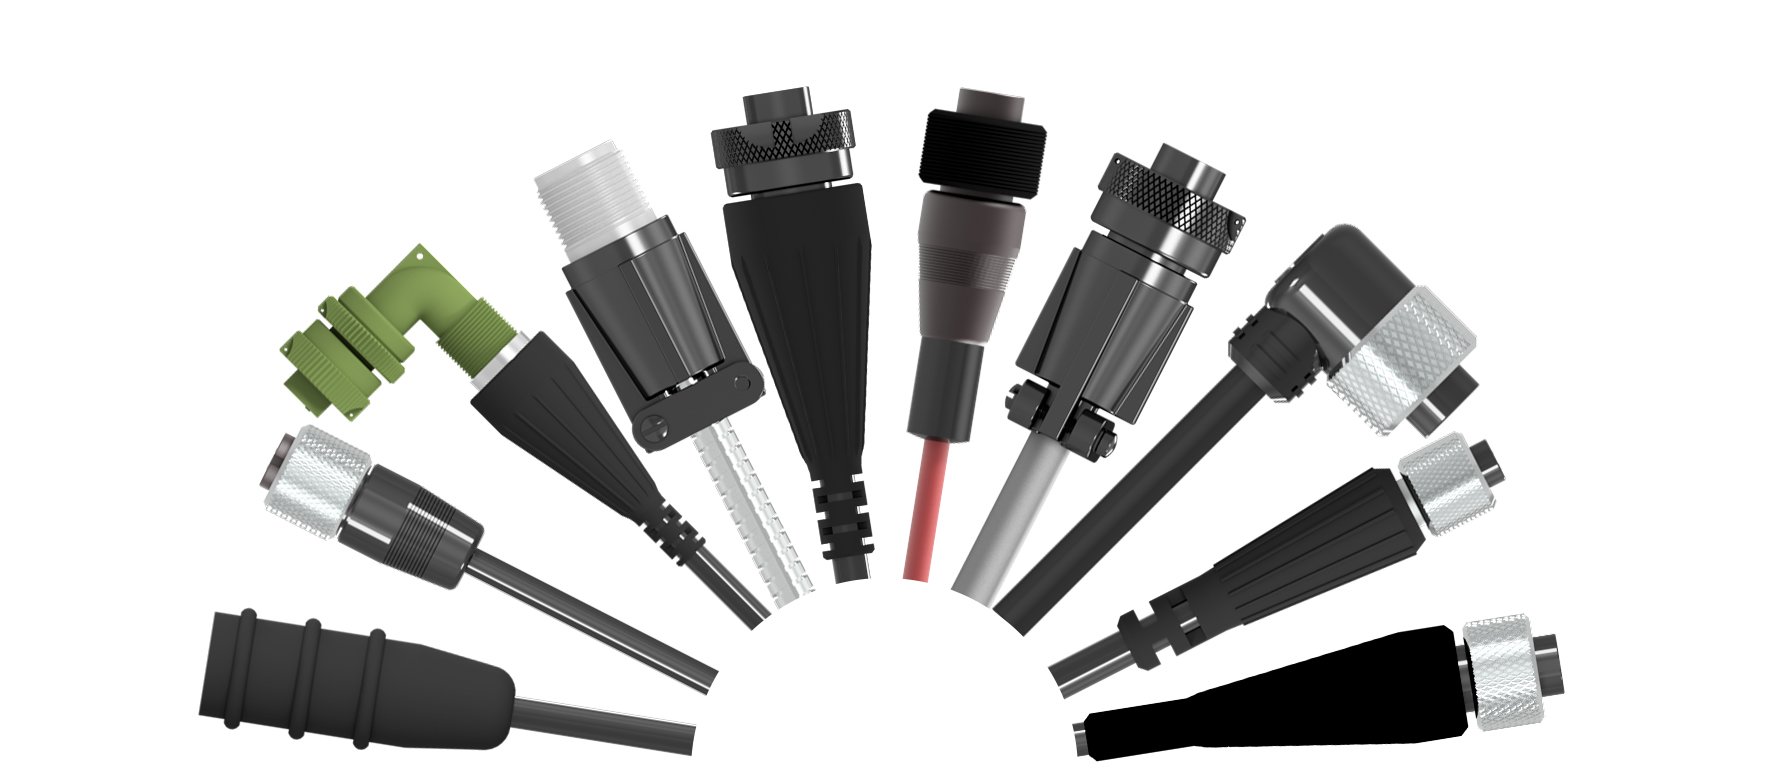 A variety of CTC connectors attached to various CTC Cables fanned out in a half-circle shape.